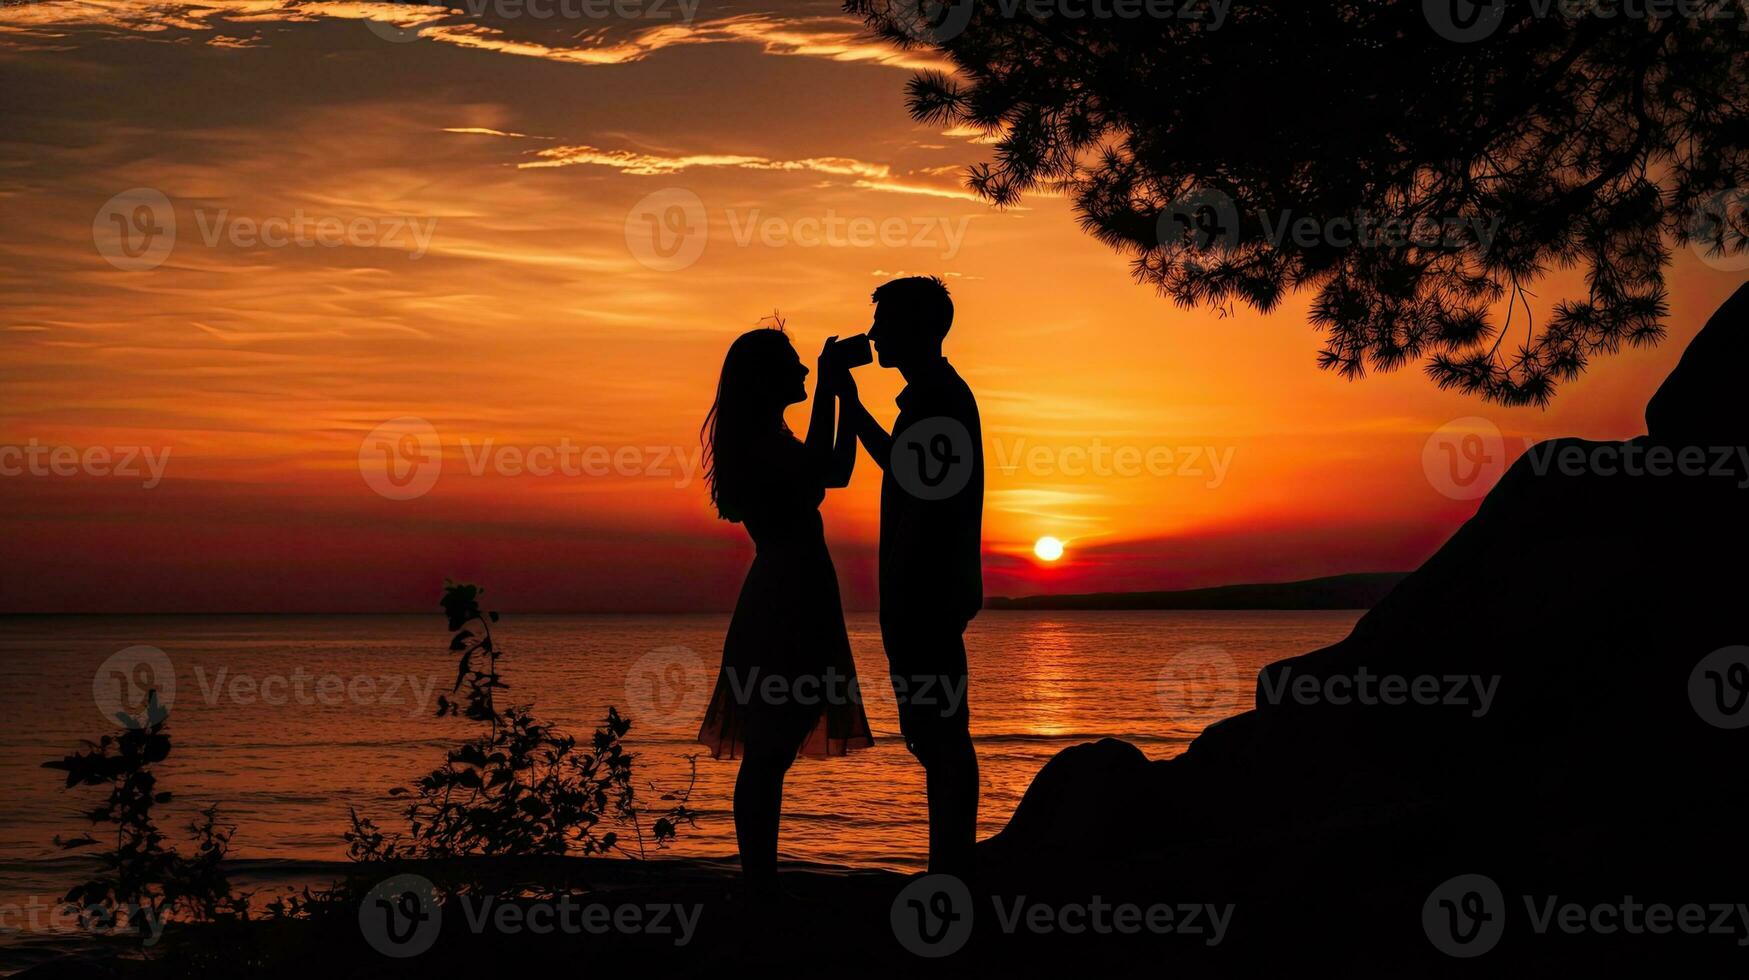 A sunset selfie with a couple in silhouette against the sea photo